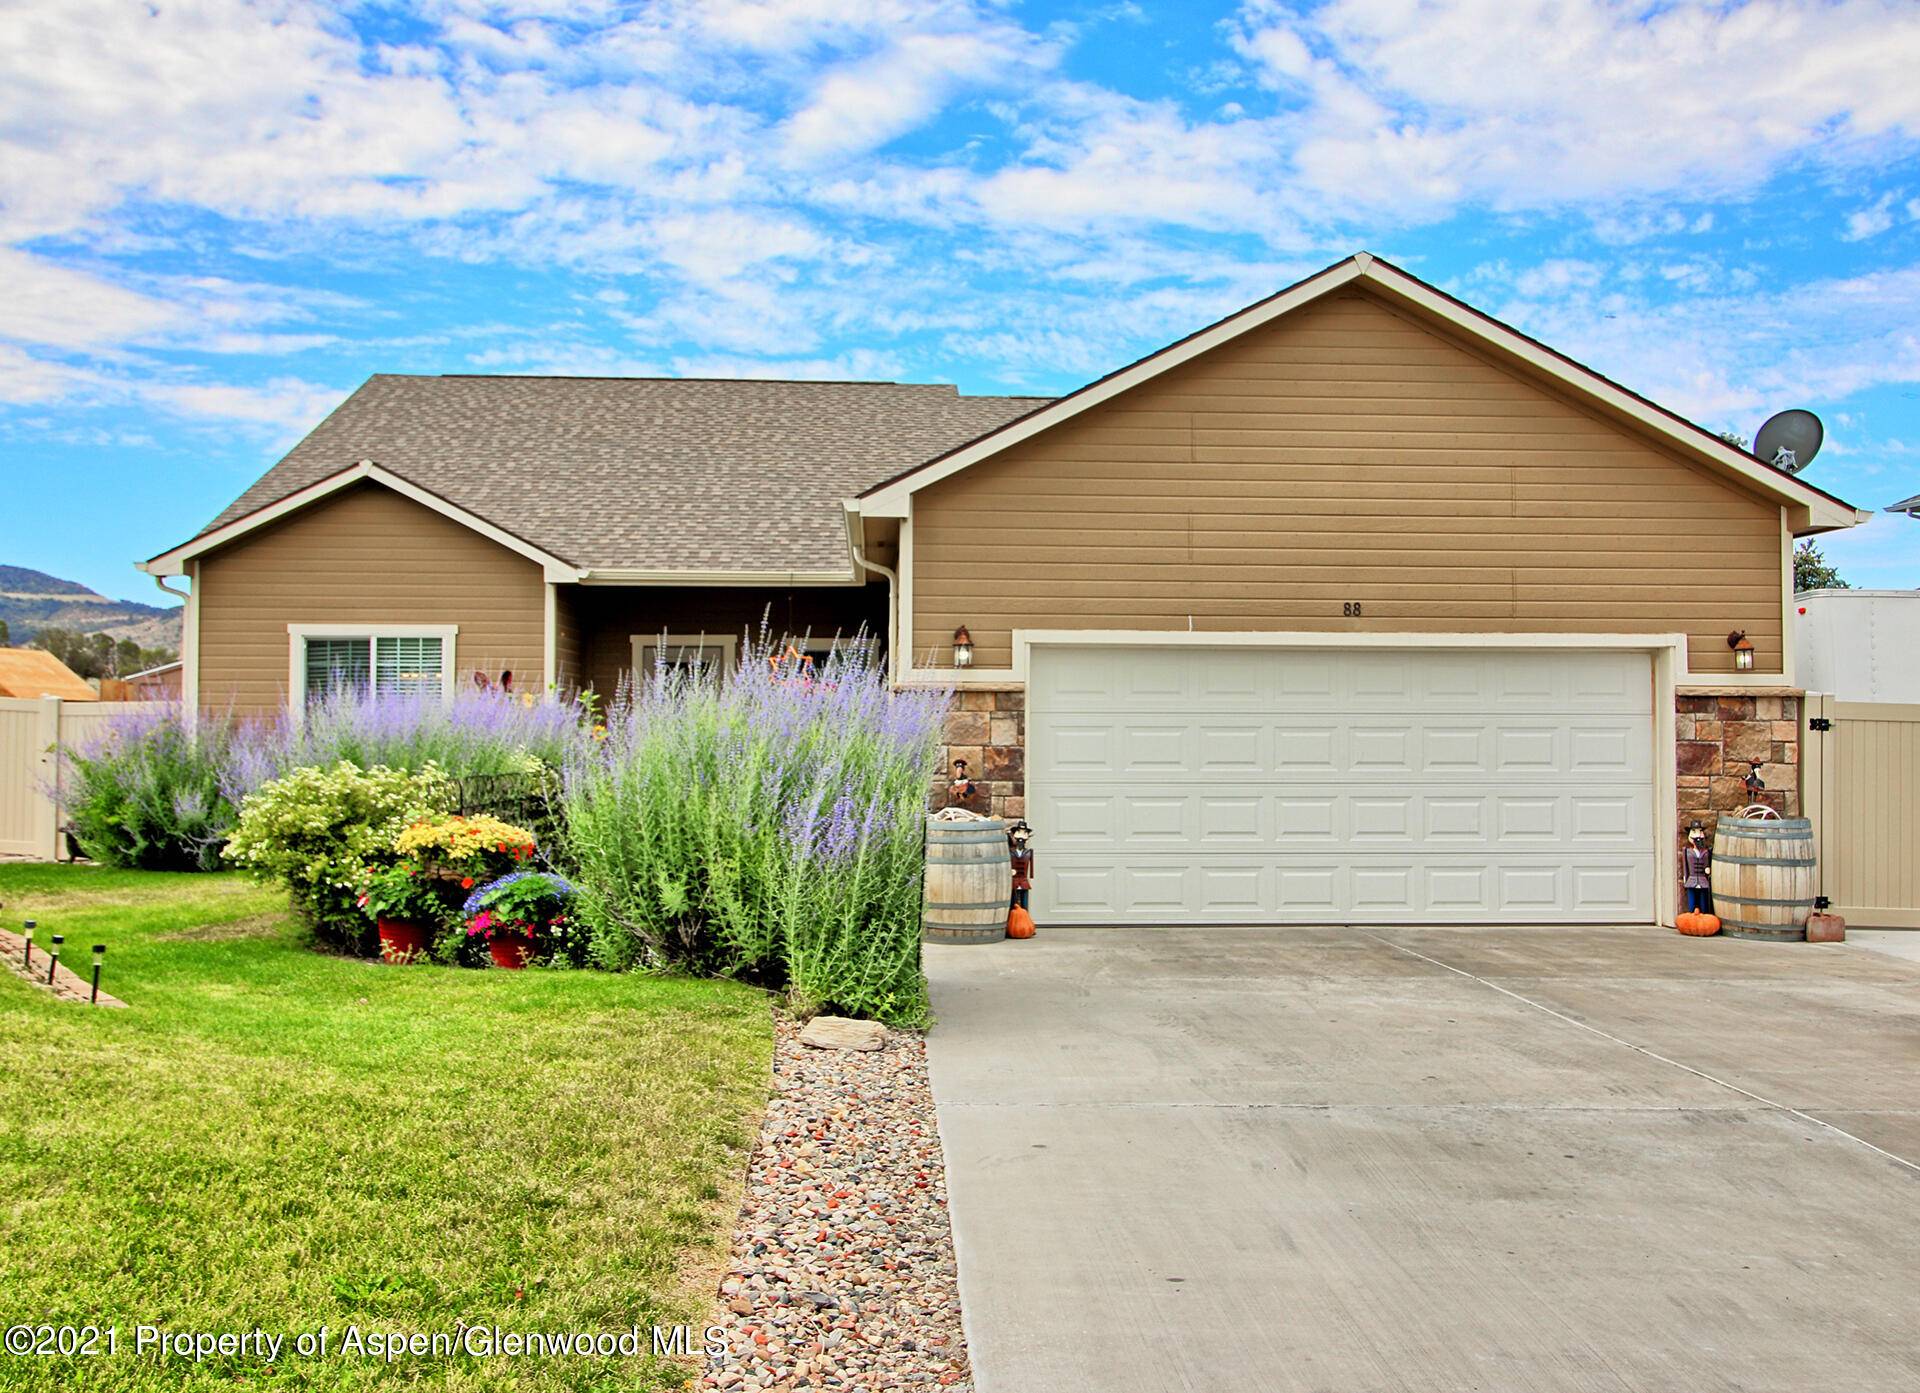 VIEWS VIEWS VIEWS... This gorgeous Ranch style home w rich finishes, including pristine Maple hardwood floors in common areas, is nestled in a beautifully maintained Battlement Mesa Subdivision w stunning ...